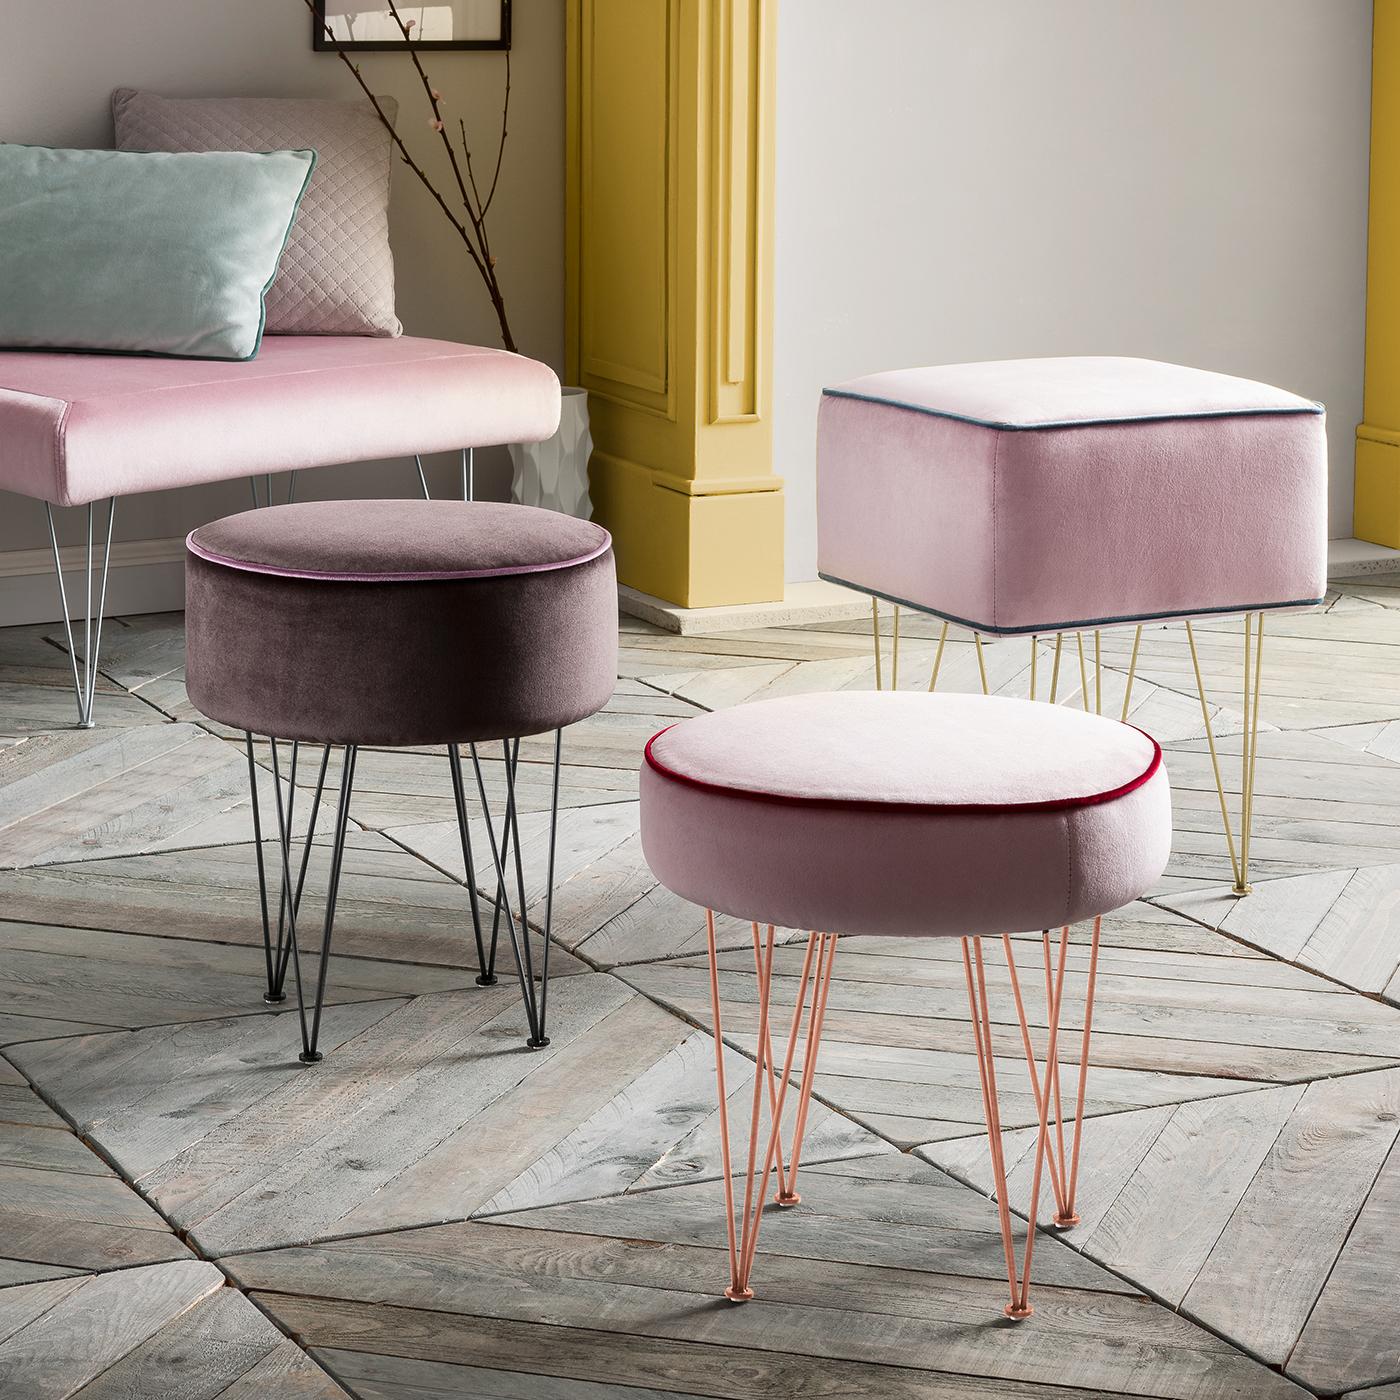 Marked by a classic design with mid-century flair, this pouf 's compact silhouette and neutral hues create a functional surface area and a stylish accent in one space-conscious piece. The bold polyester-padded top features a 25 mm-thick round frame